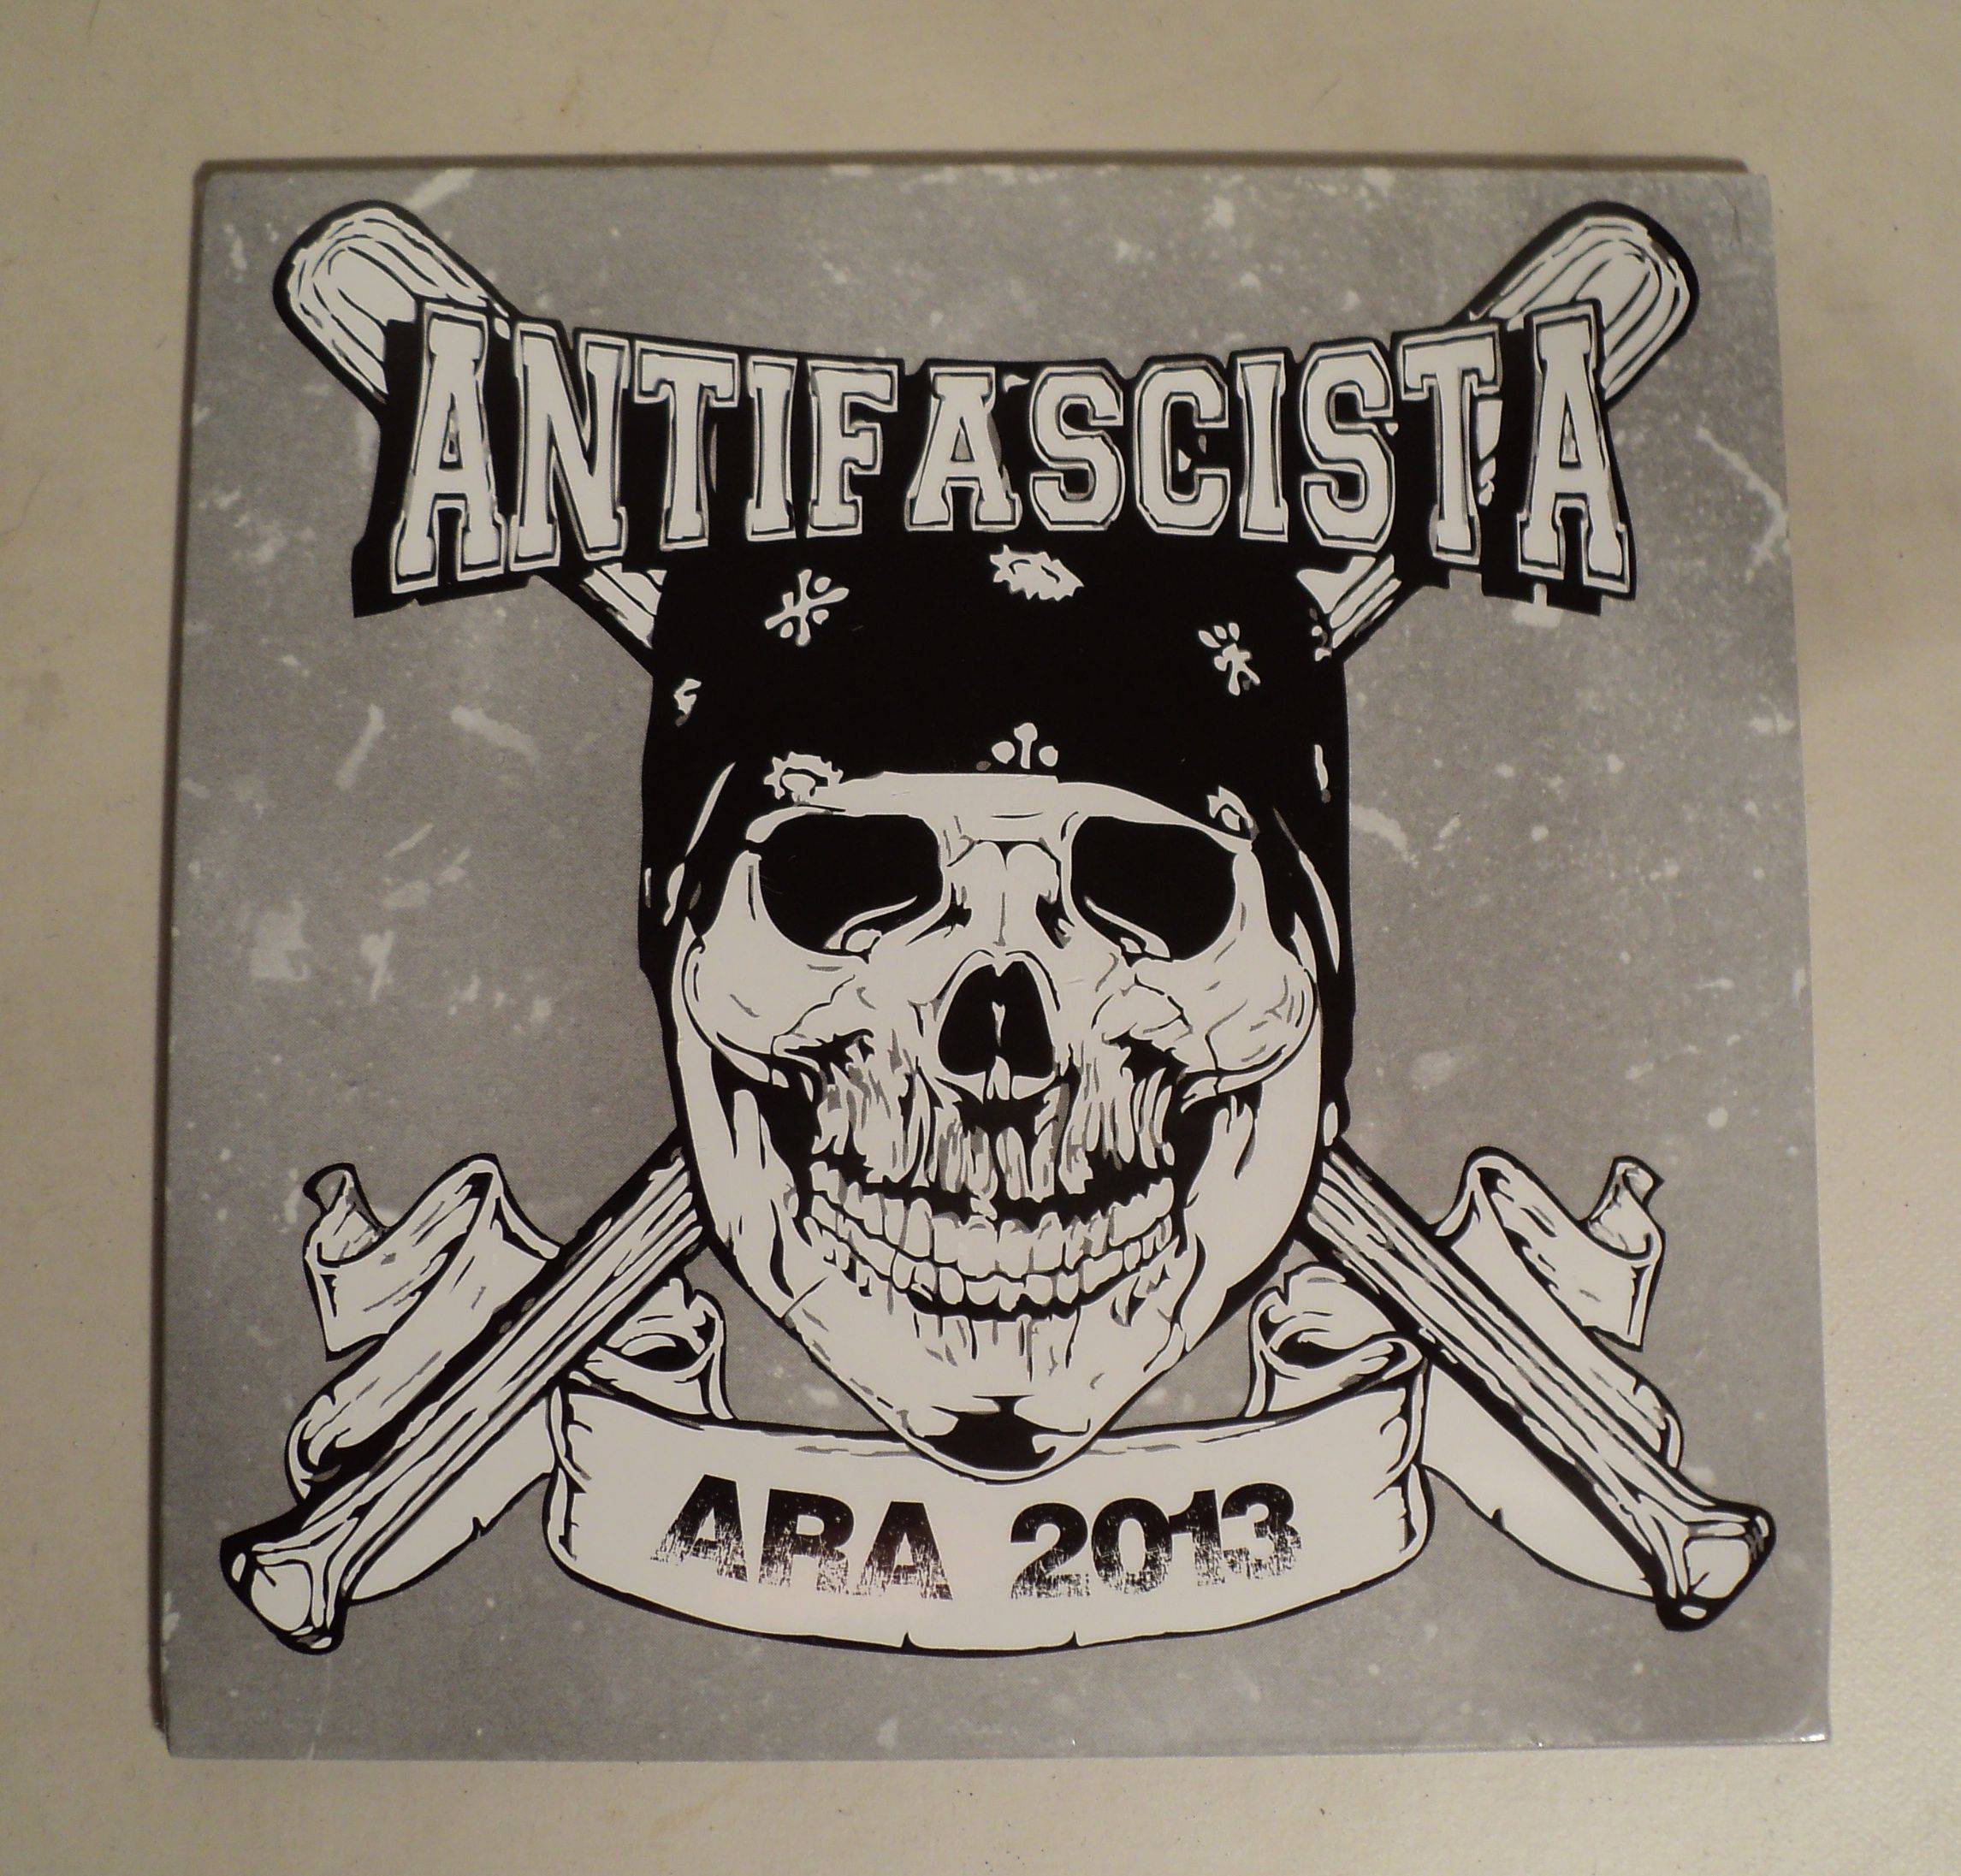 ANTI-RACIST ACTION BENEFIT COMPILATION CD NOW AVAILABLE